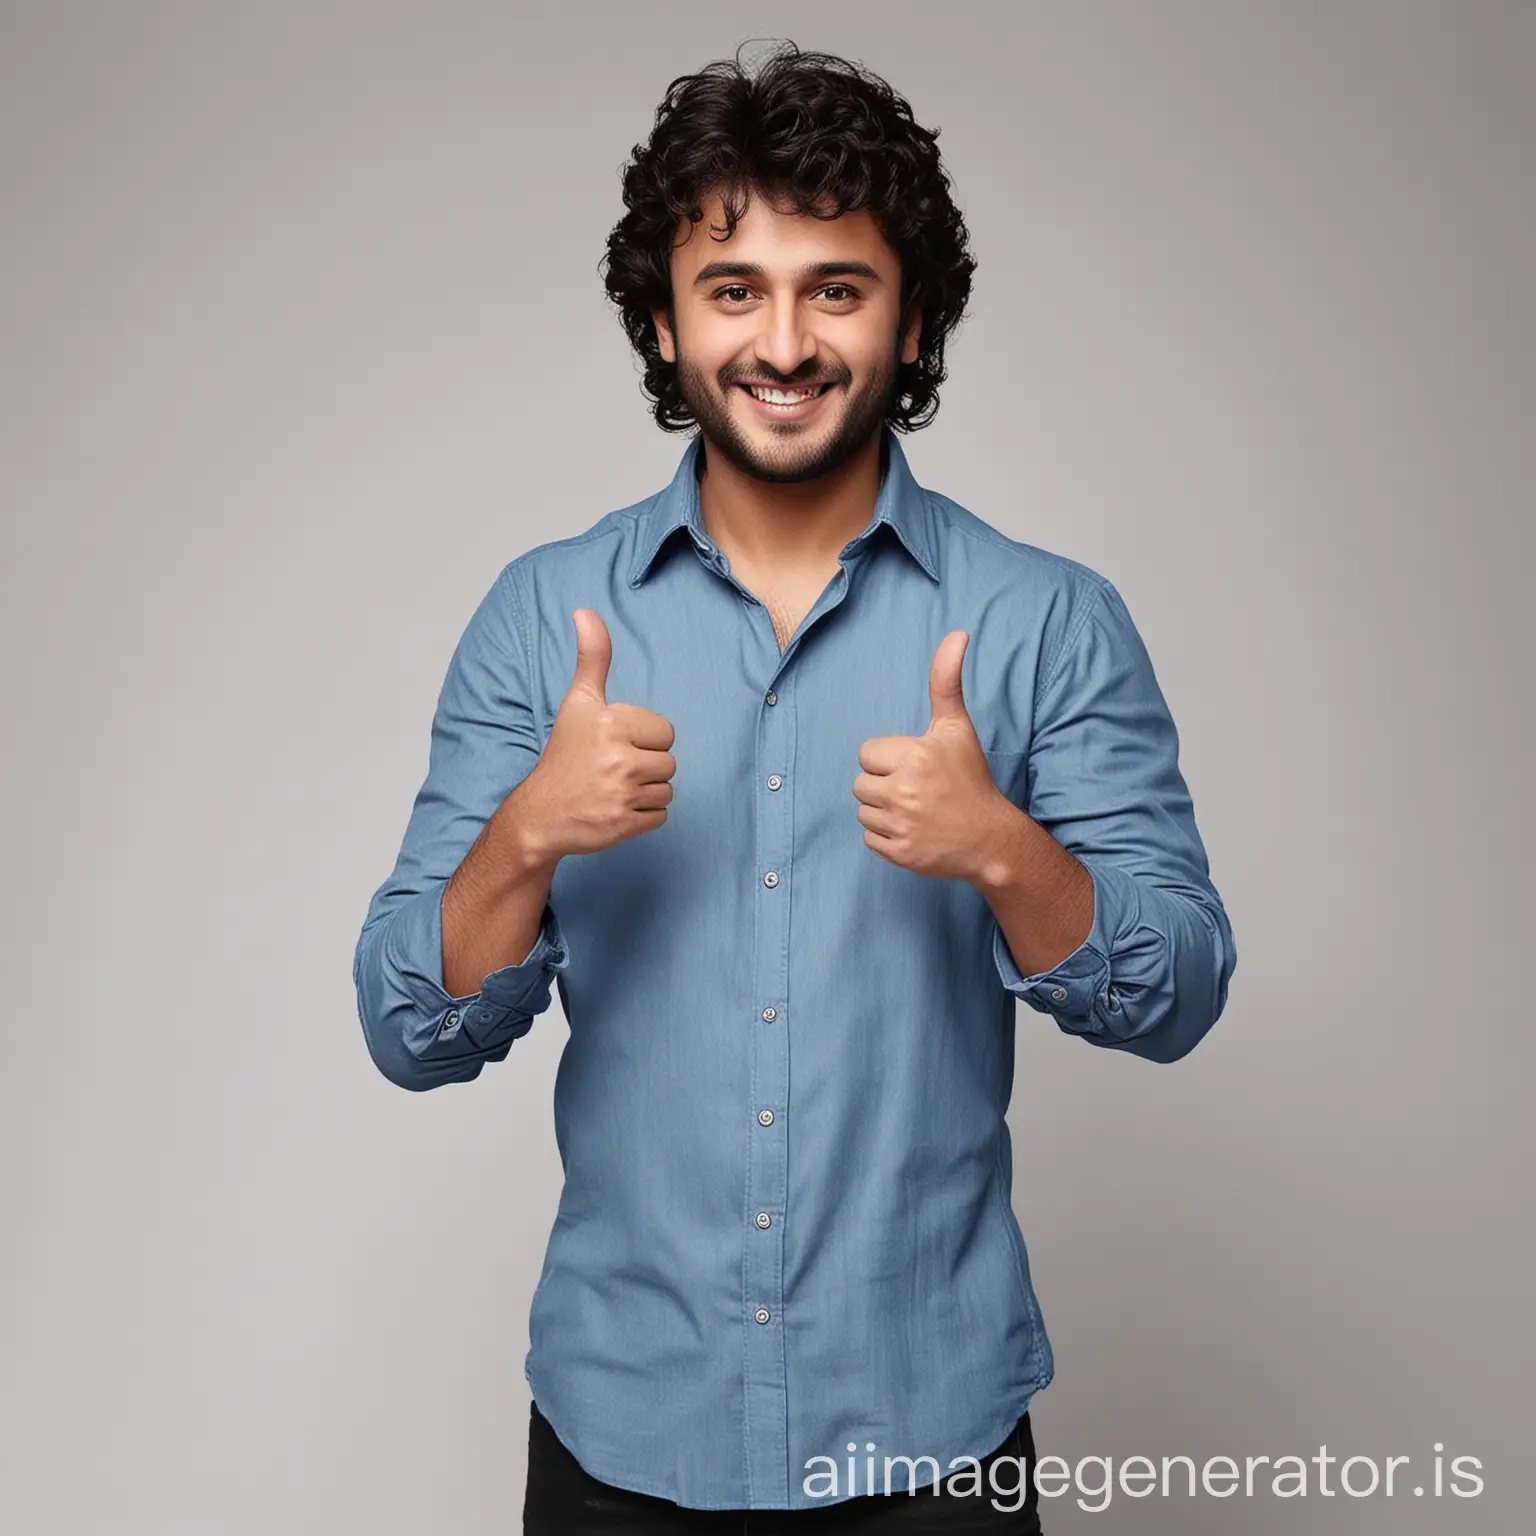 Professional-Businessman-Shane-Nigam-Endorses-Best-Offer-in-Blue-Shirt-and-Formal-Attire